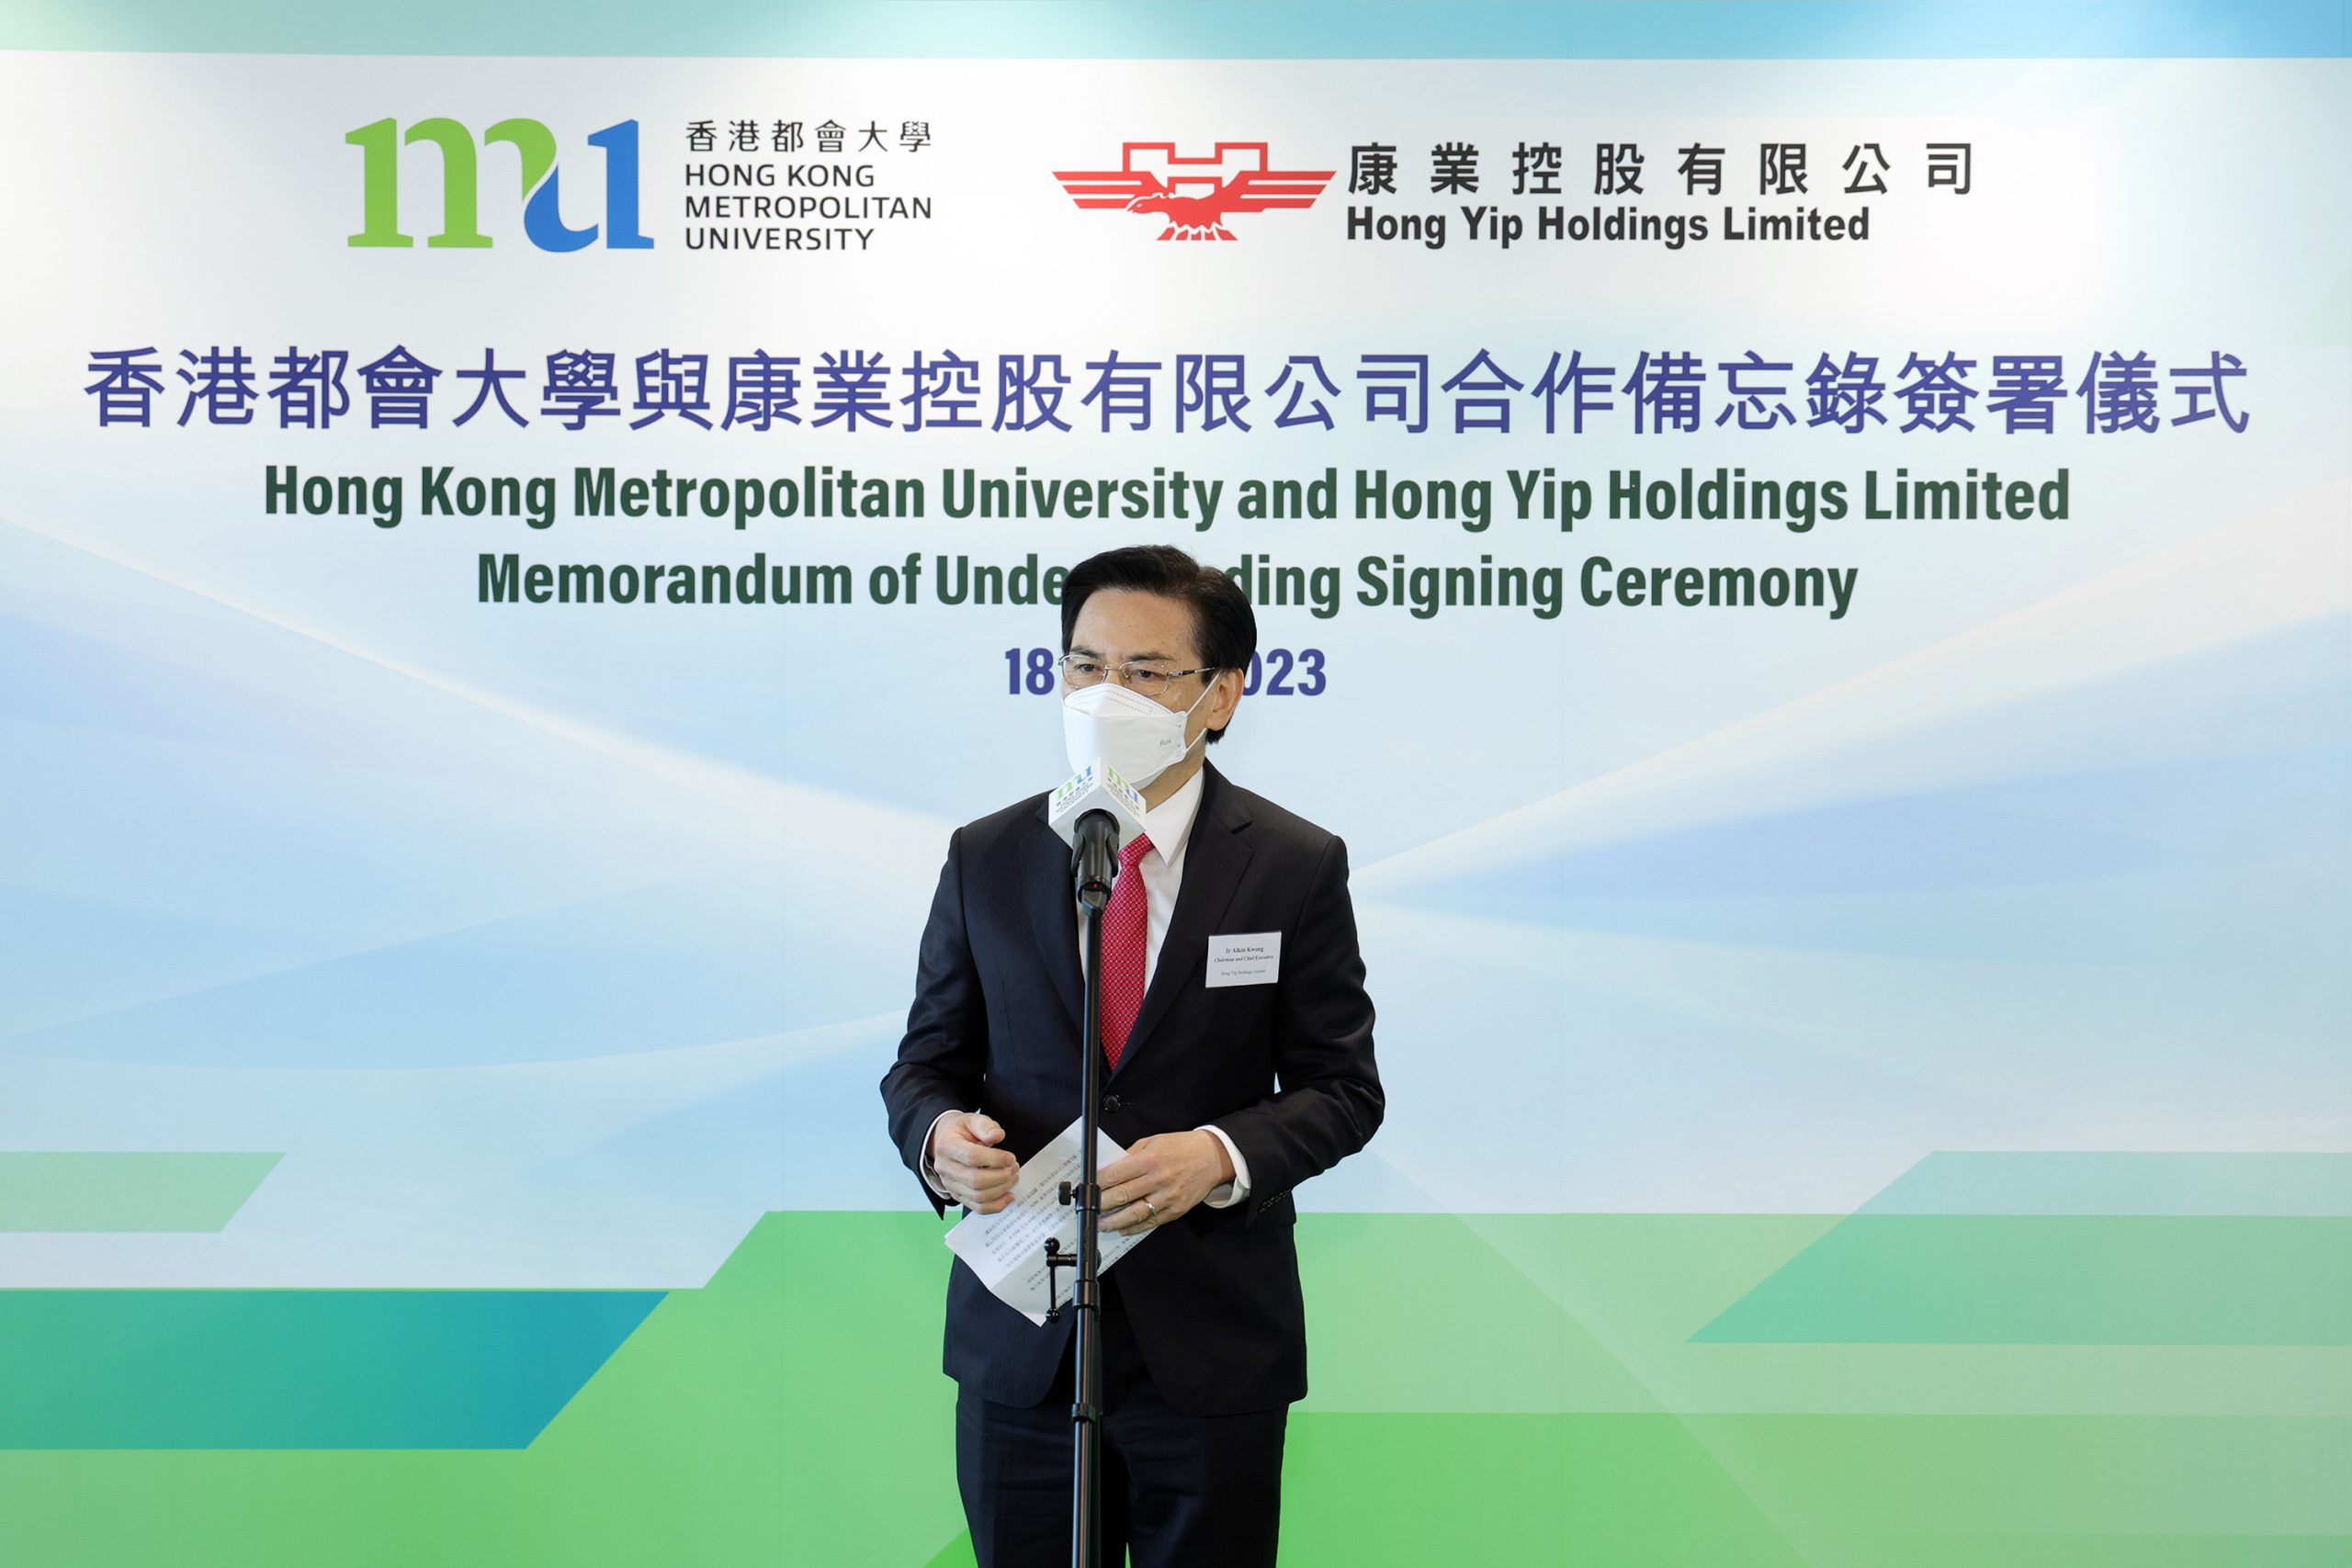 Chairman and Chief Executive of Hong Yip Holdings Limited Ir Alkin Kwong Ching-wai remarks that this MOU facilitates a deeper and more diversified cooperation between Hong Yip and HKMU to work together for the better future of the young generation.